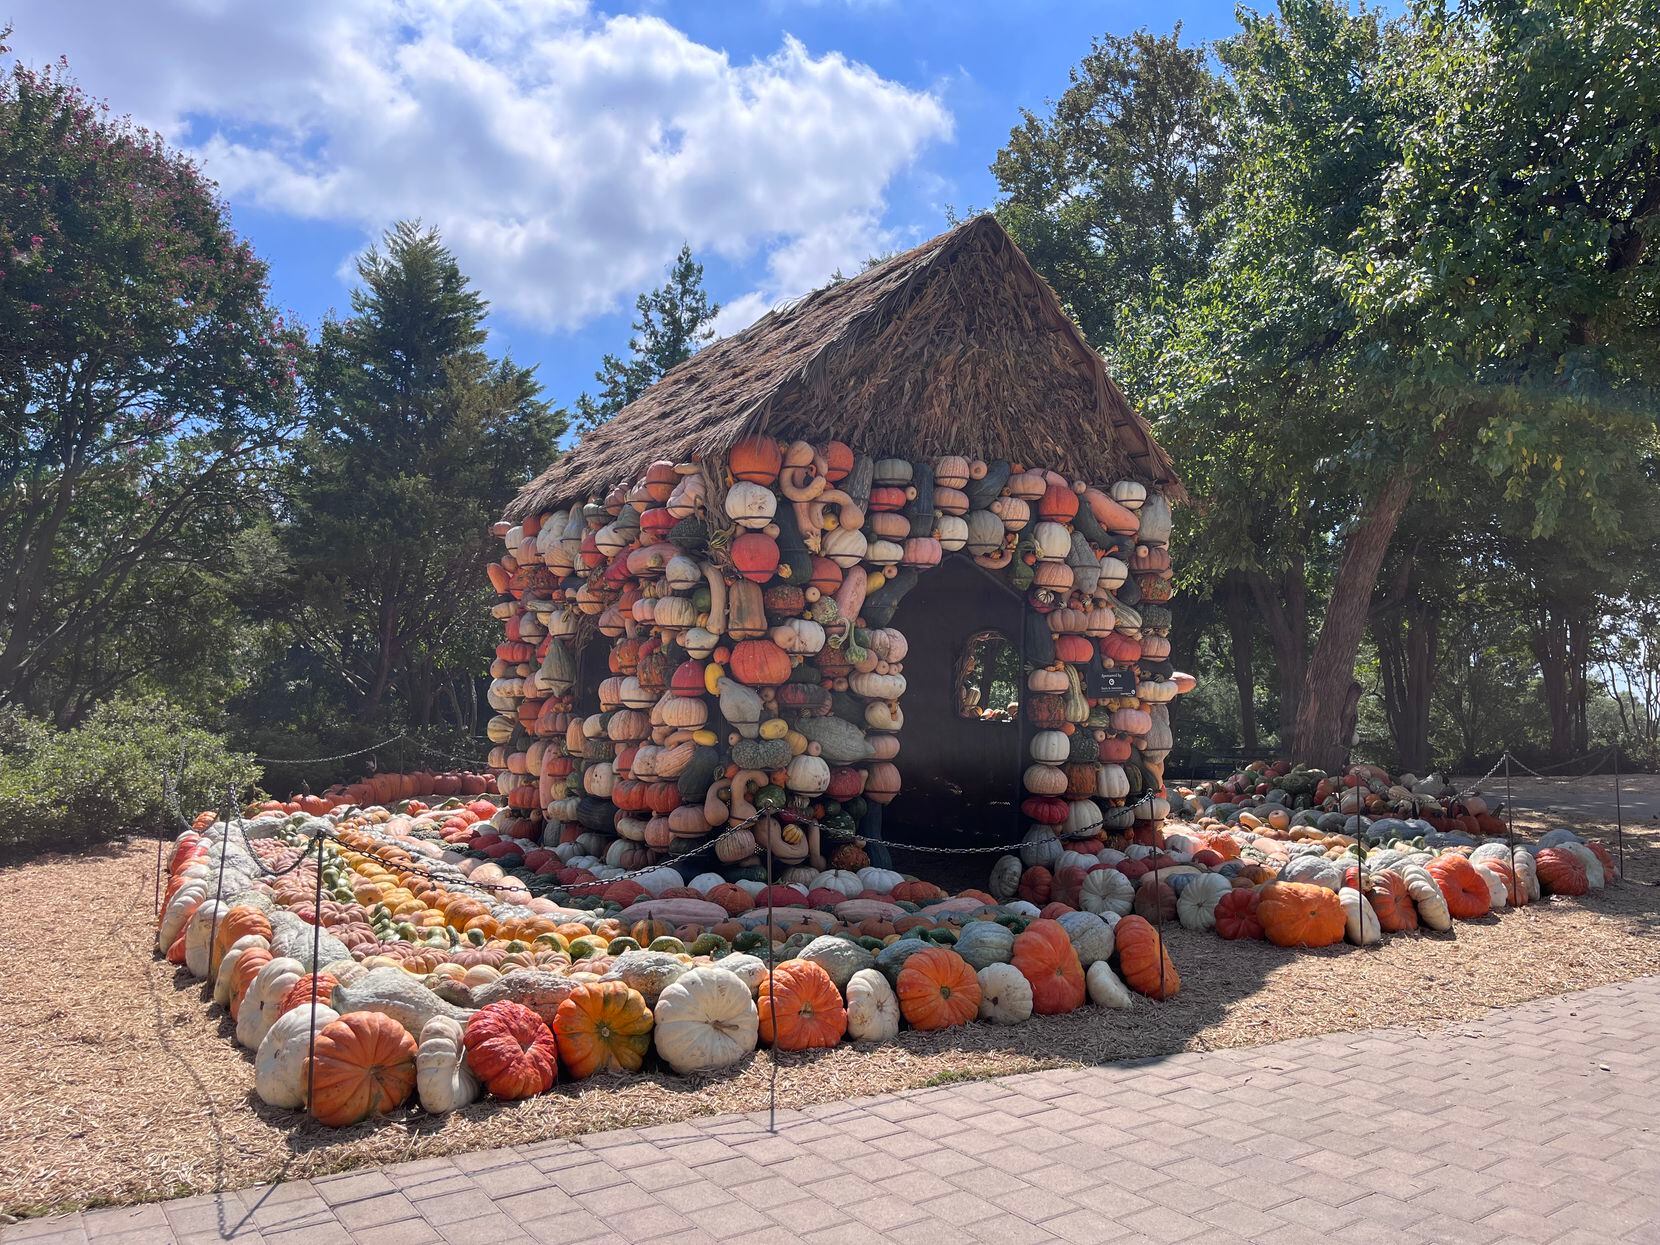 Autumn at the Dallas arboretum with 100,000 pumpkins to tell fairy tales this 2022.